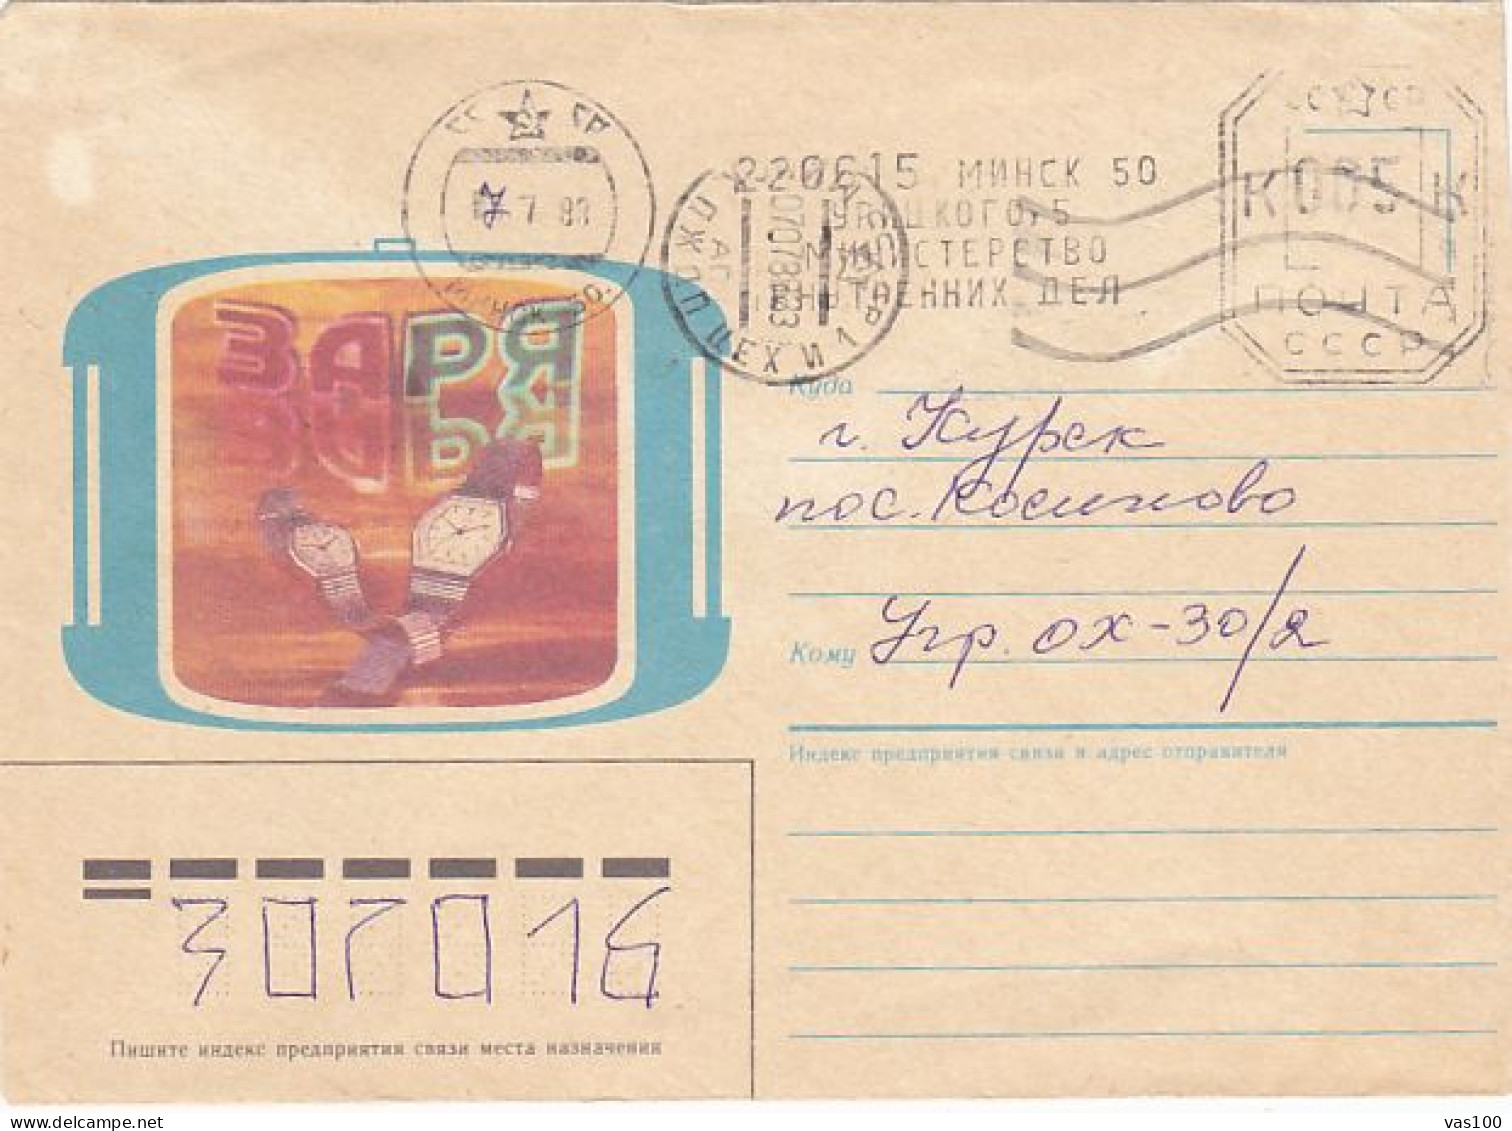 CLOCKS, WATCHES, SPECIAL COVER, 1988, RUSSIA - Horlogerie